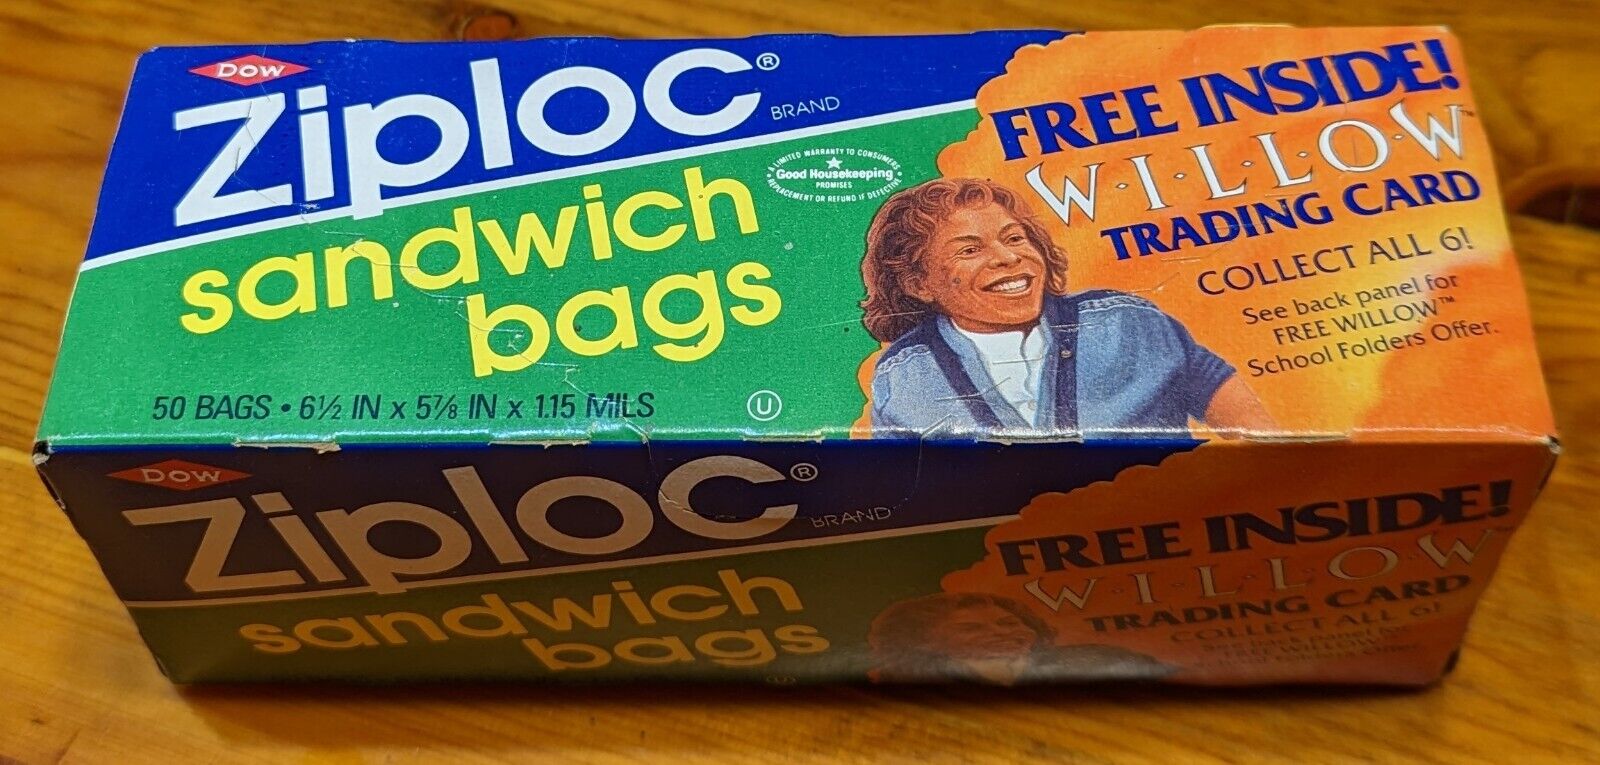 Rare 1988 Sealed Ziploc Sandwich Bags, with Willow Trading Card Promotion 